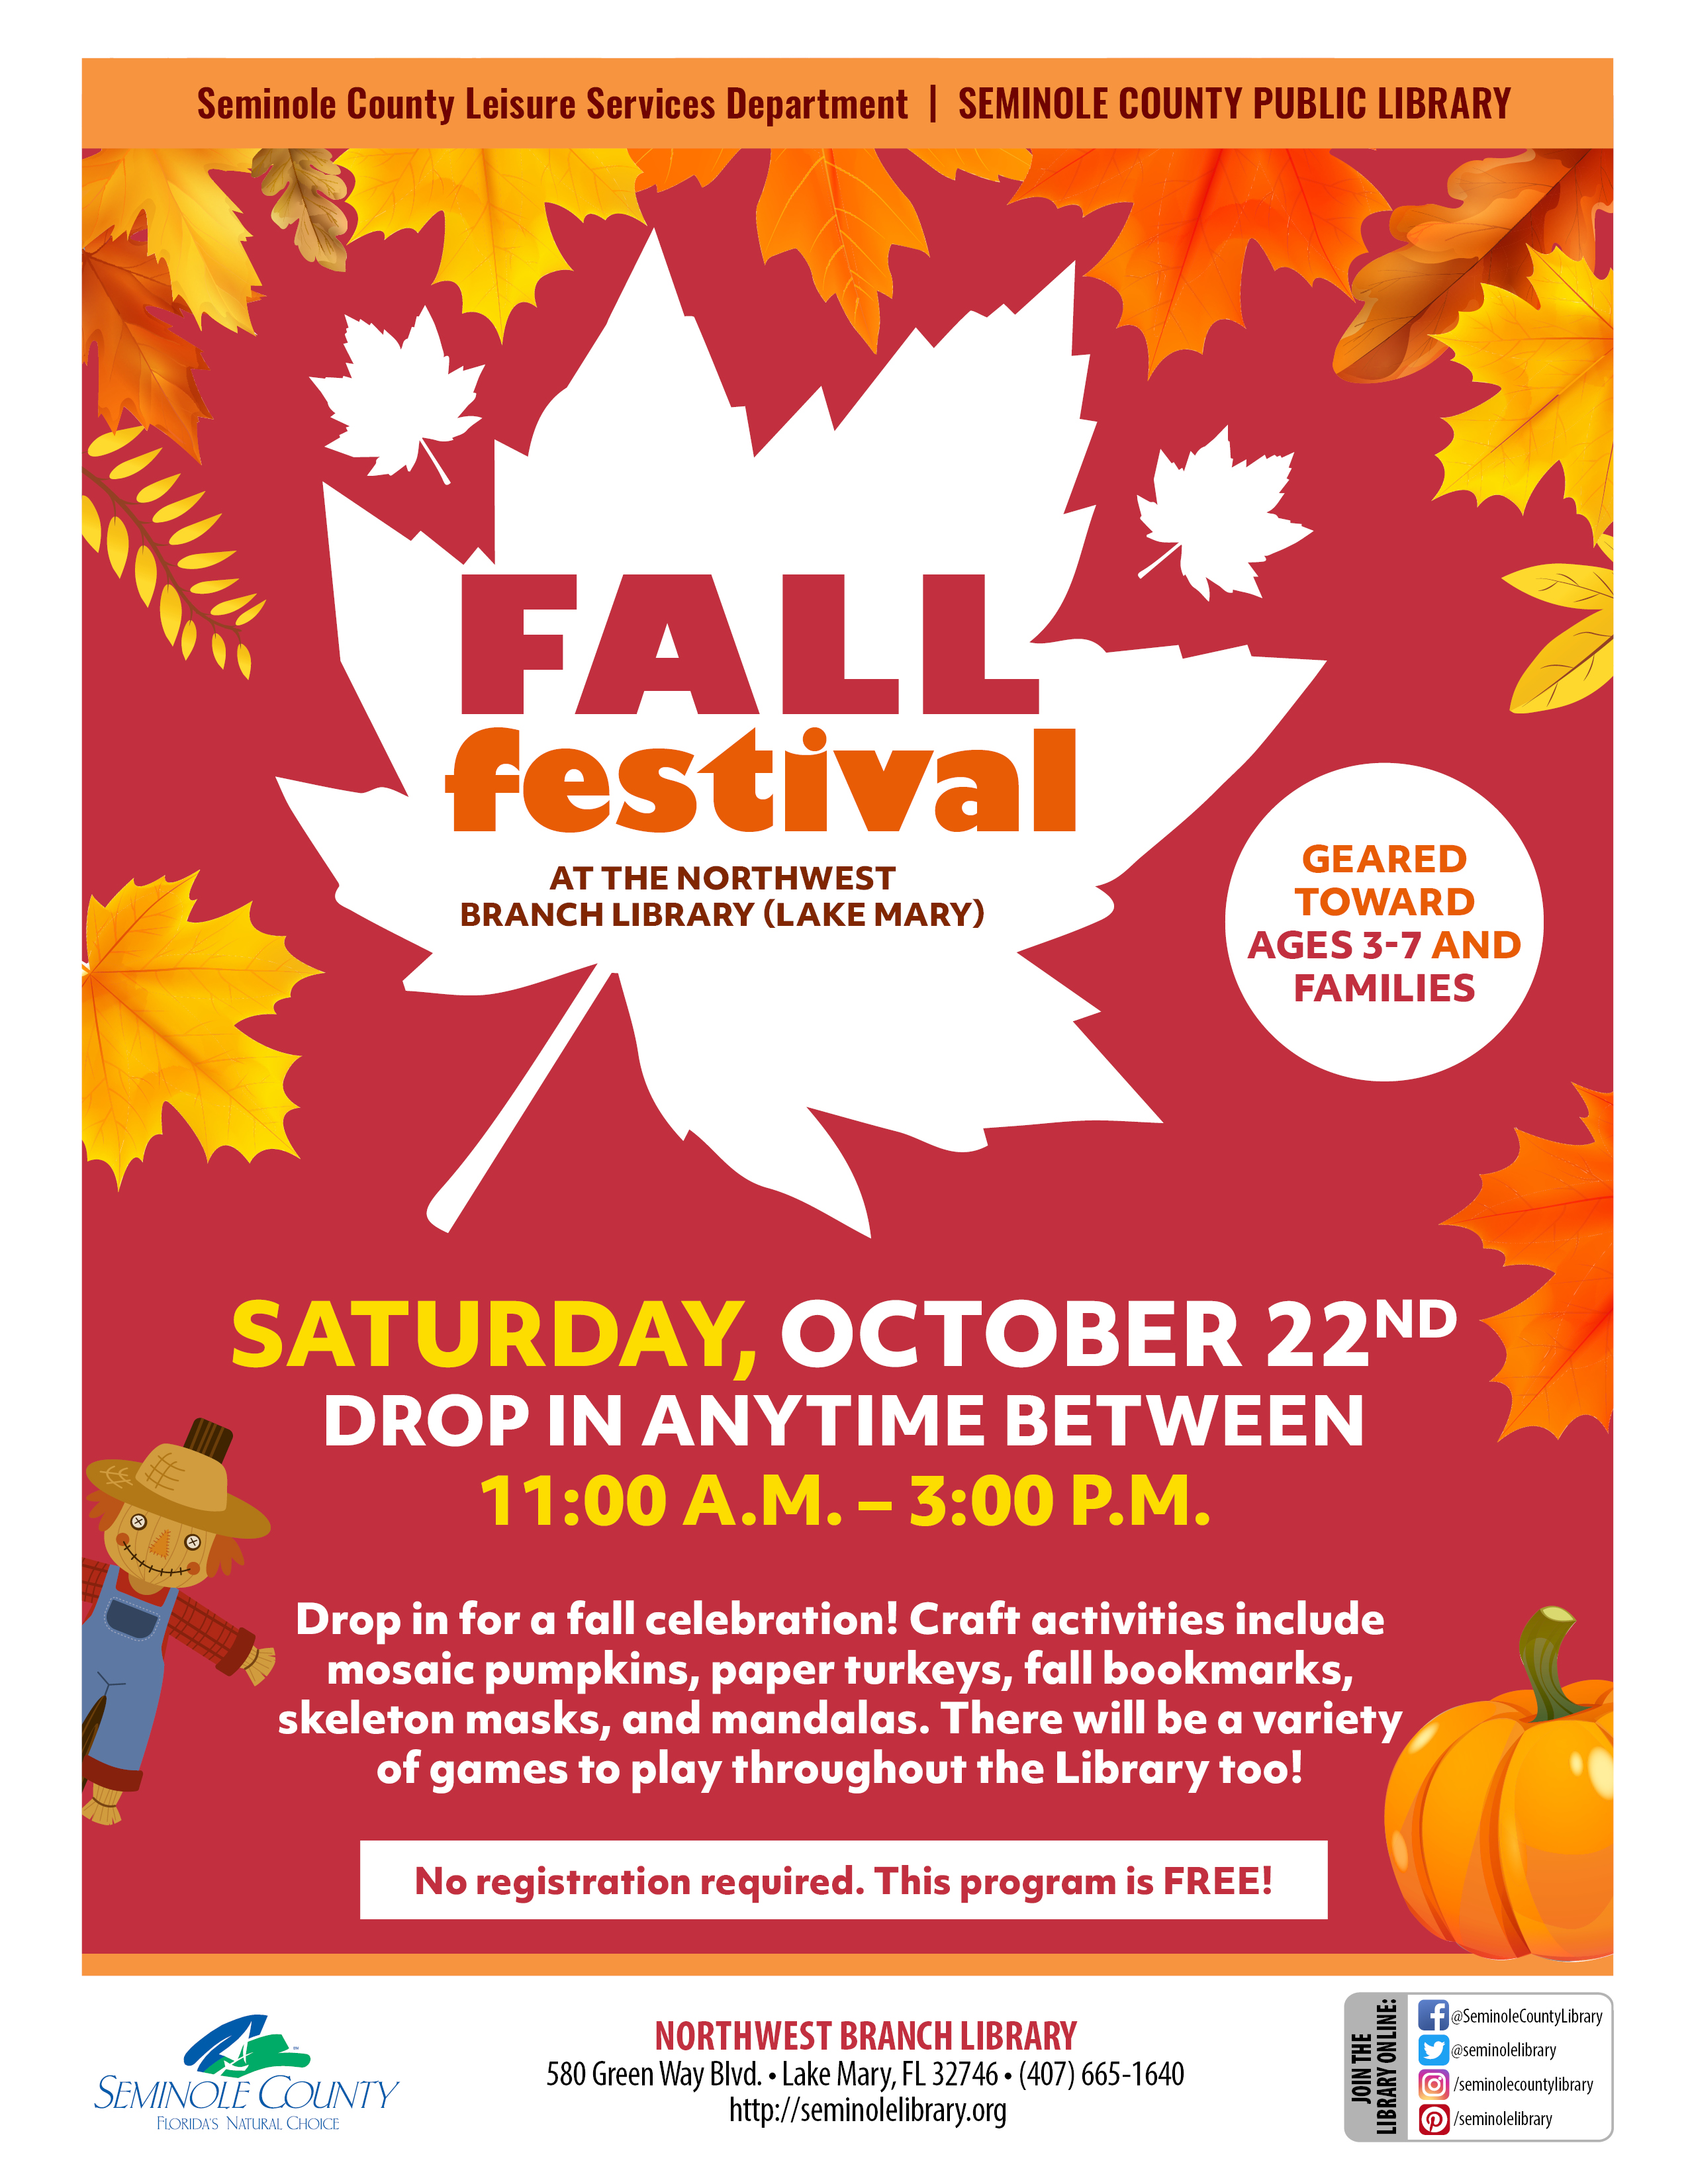 Fall Festival at the Northwest Branch Library